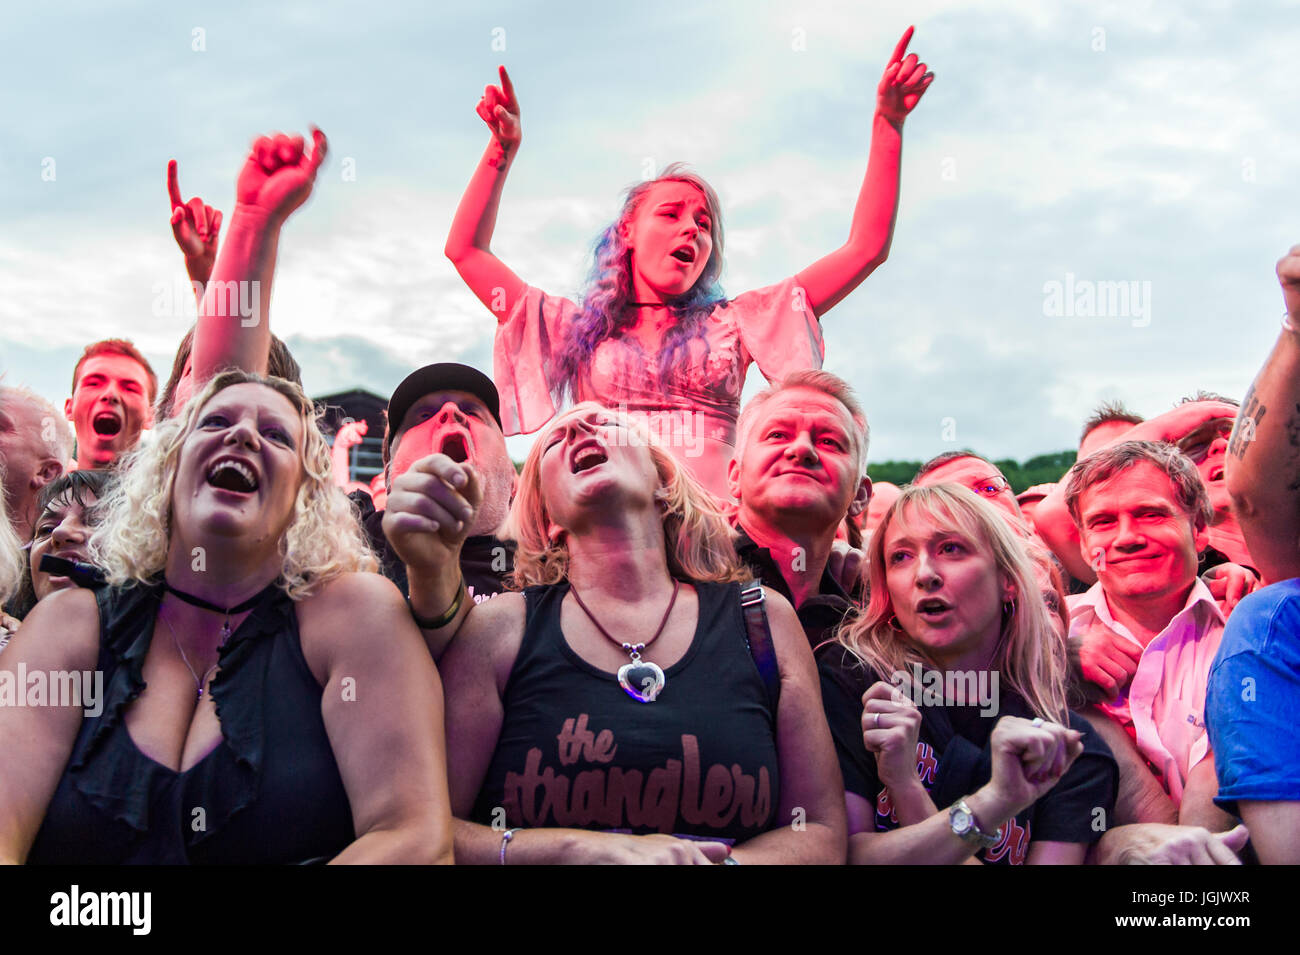 Coventry, UK. 7th July, 2017.  The annual Coventry Godiva Music Festival opened last night with huge crowds attending to watch legendary New Wave band The Stranglers headline.    The festival runs until Sunday evening with acts such as Kate Nash, Example, Badfinger and The Darkness still to perform.  Credit: AG News/Alamy Live News. Stock Photo